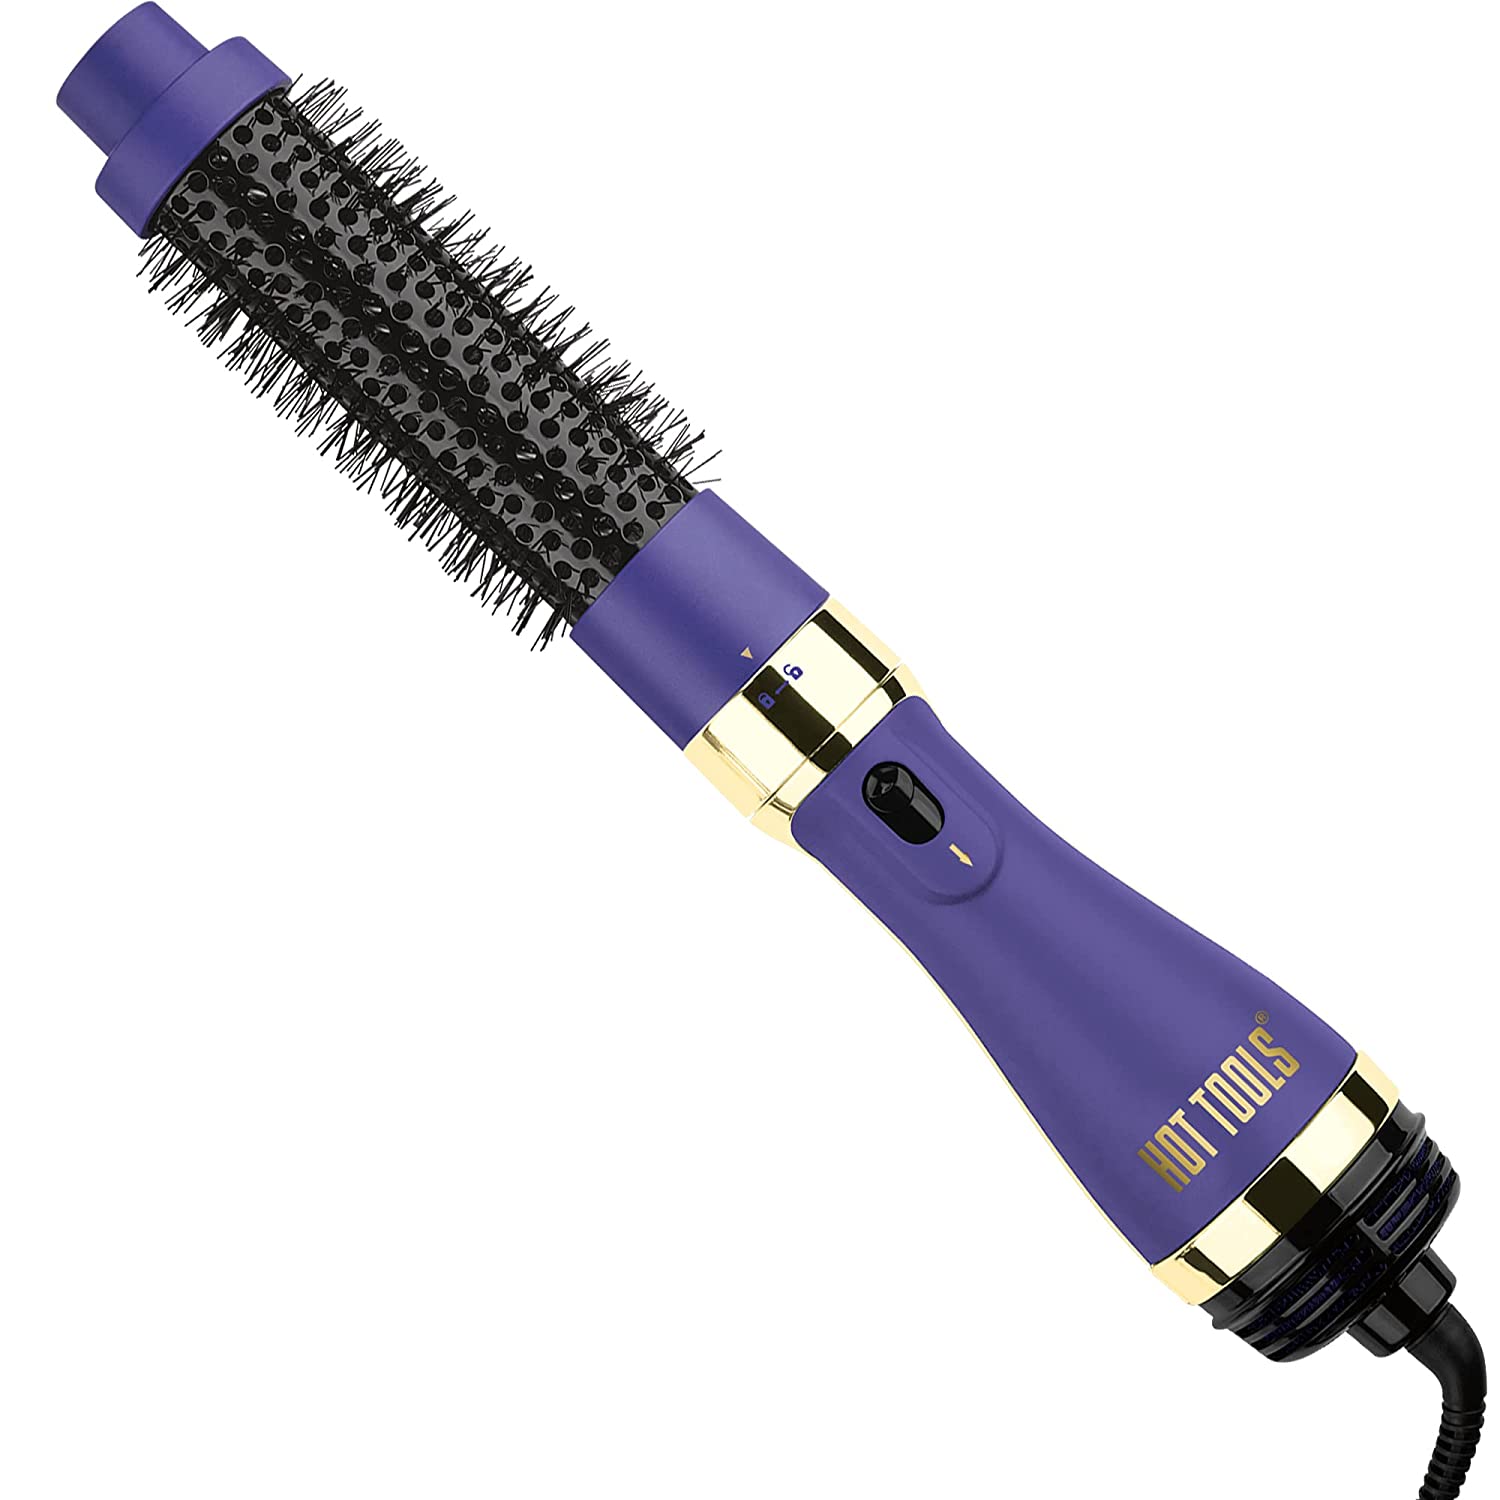 ''HOT TOOLS Pro Signature Detachable One Step Round Brush and Hair Dryer, 1.5 inch Barrel''